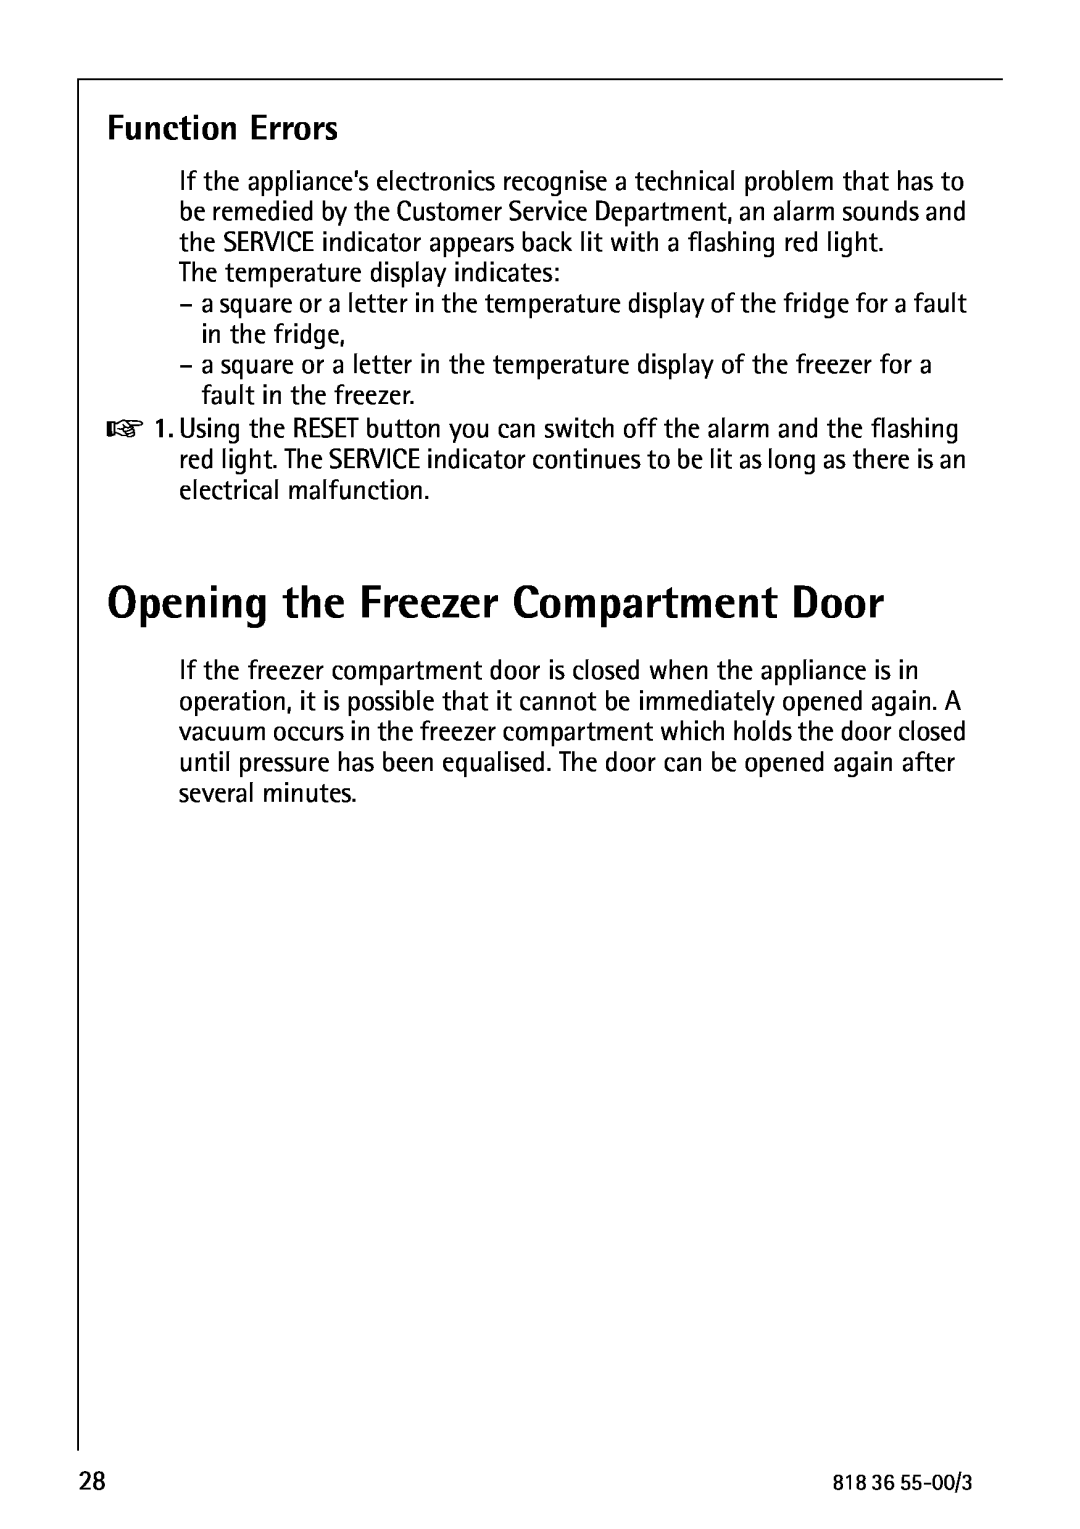 AEG 86378-KG operating instructions Opening the Freezer Compartment Door, Function Errors 